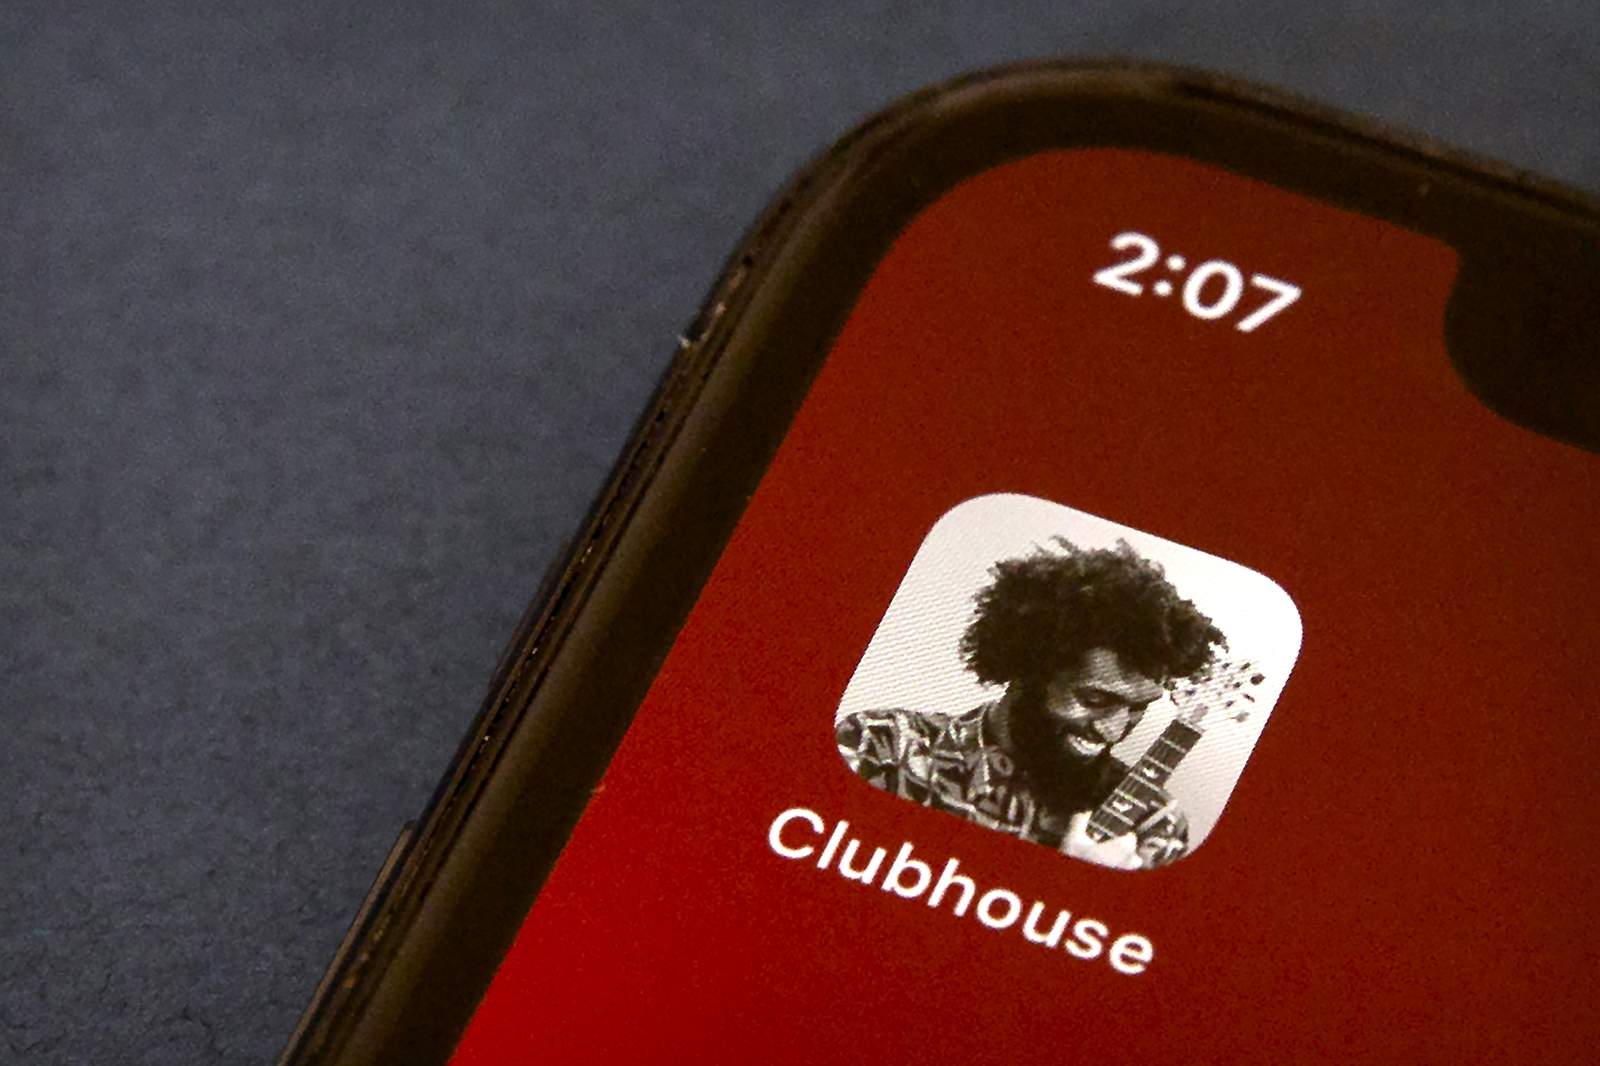 EXPLAINER: What is Clubhouse, the buzzy new audio chat app?